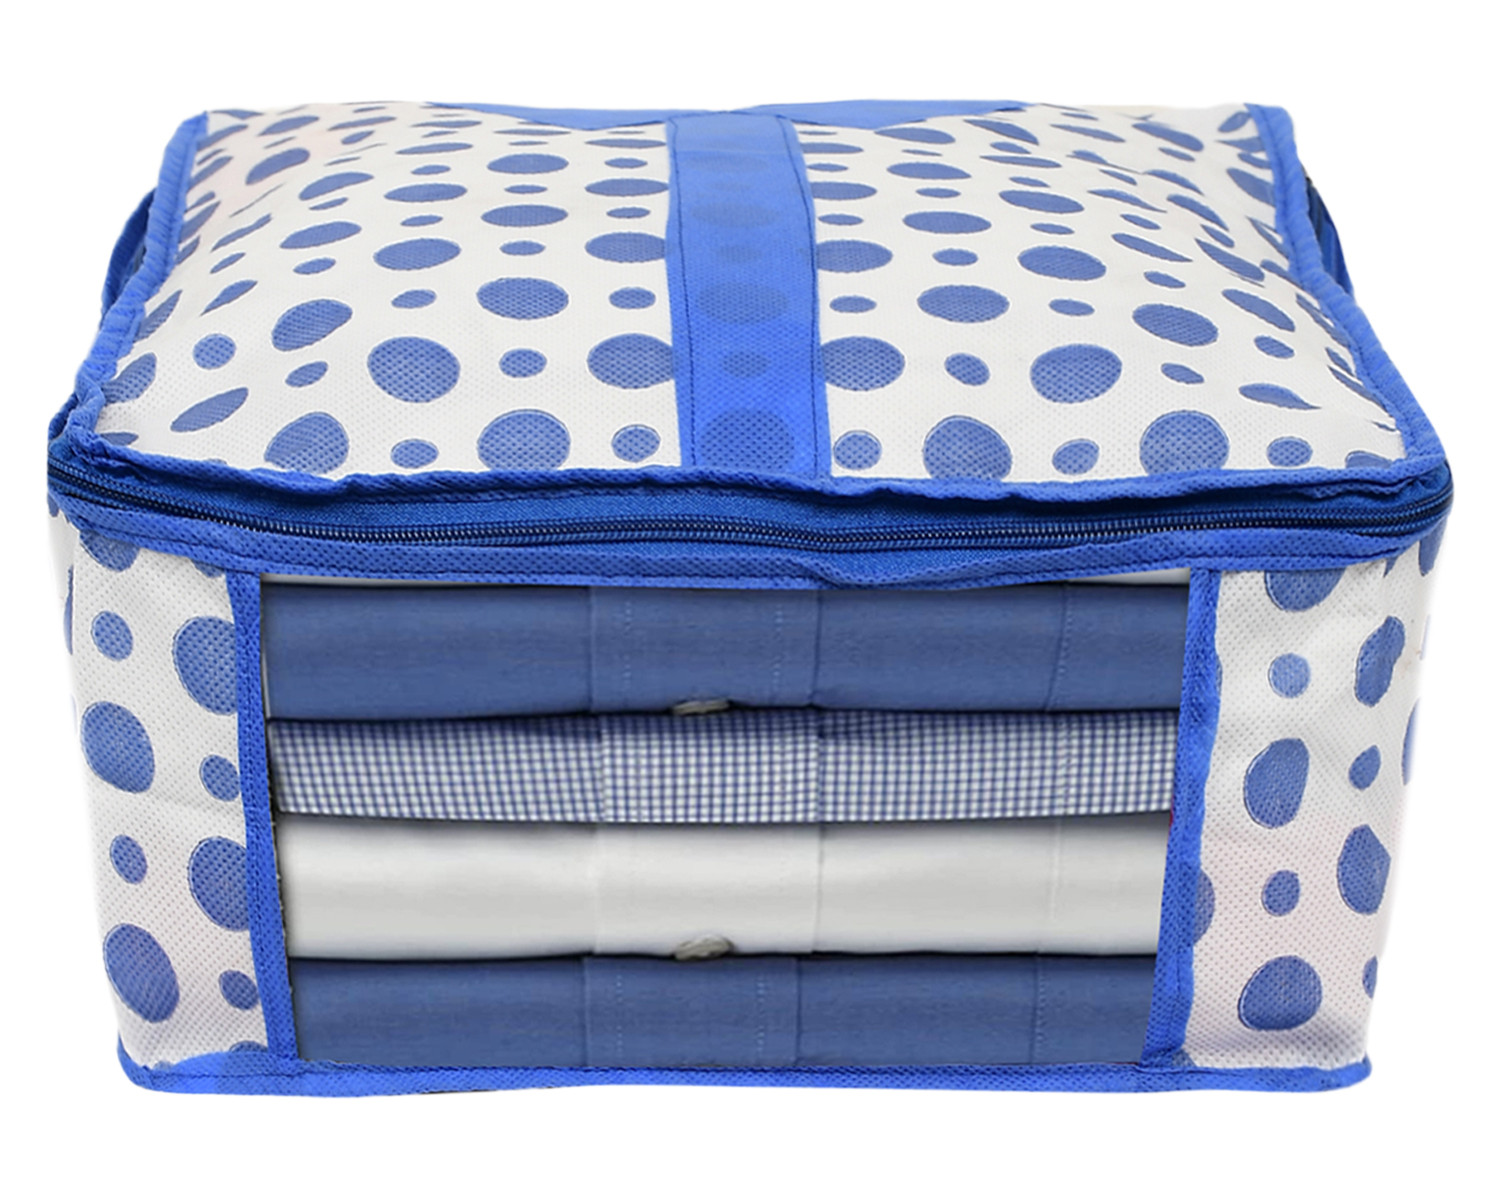 Kuber Industries Dot Print Non-Woven Shirt Cover/Clothing Organizer/Wardrobe Organizer For Home, Traveling (Blue) 54KM4177